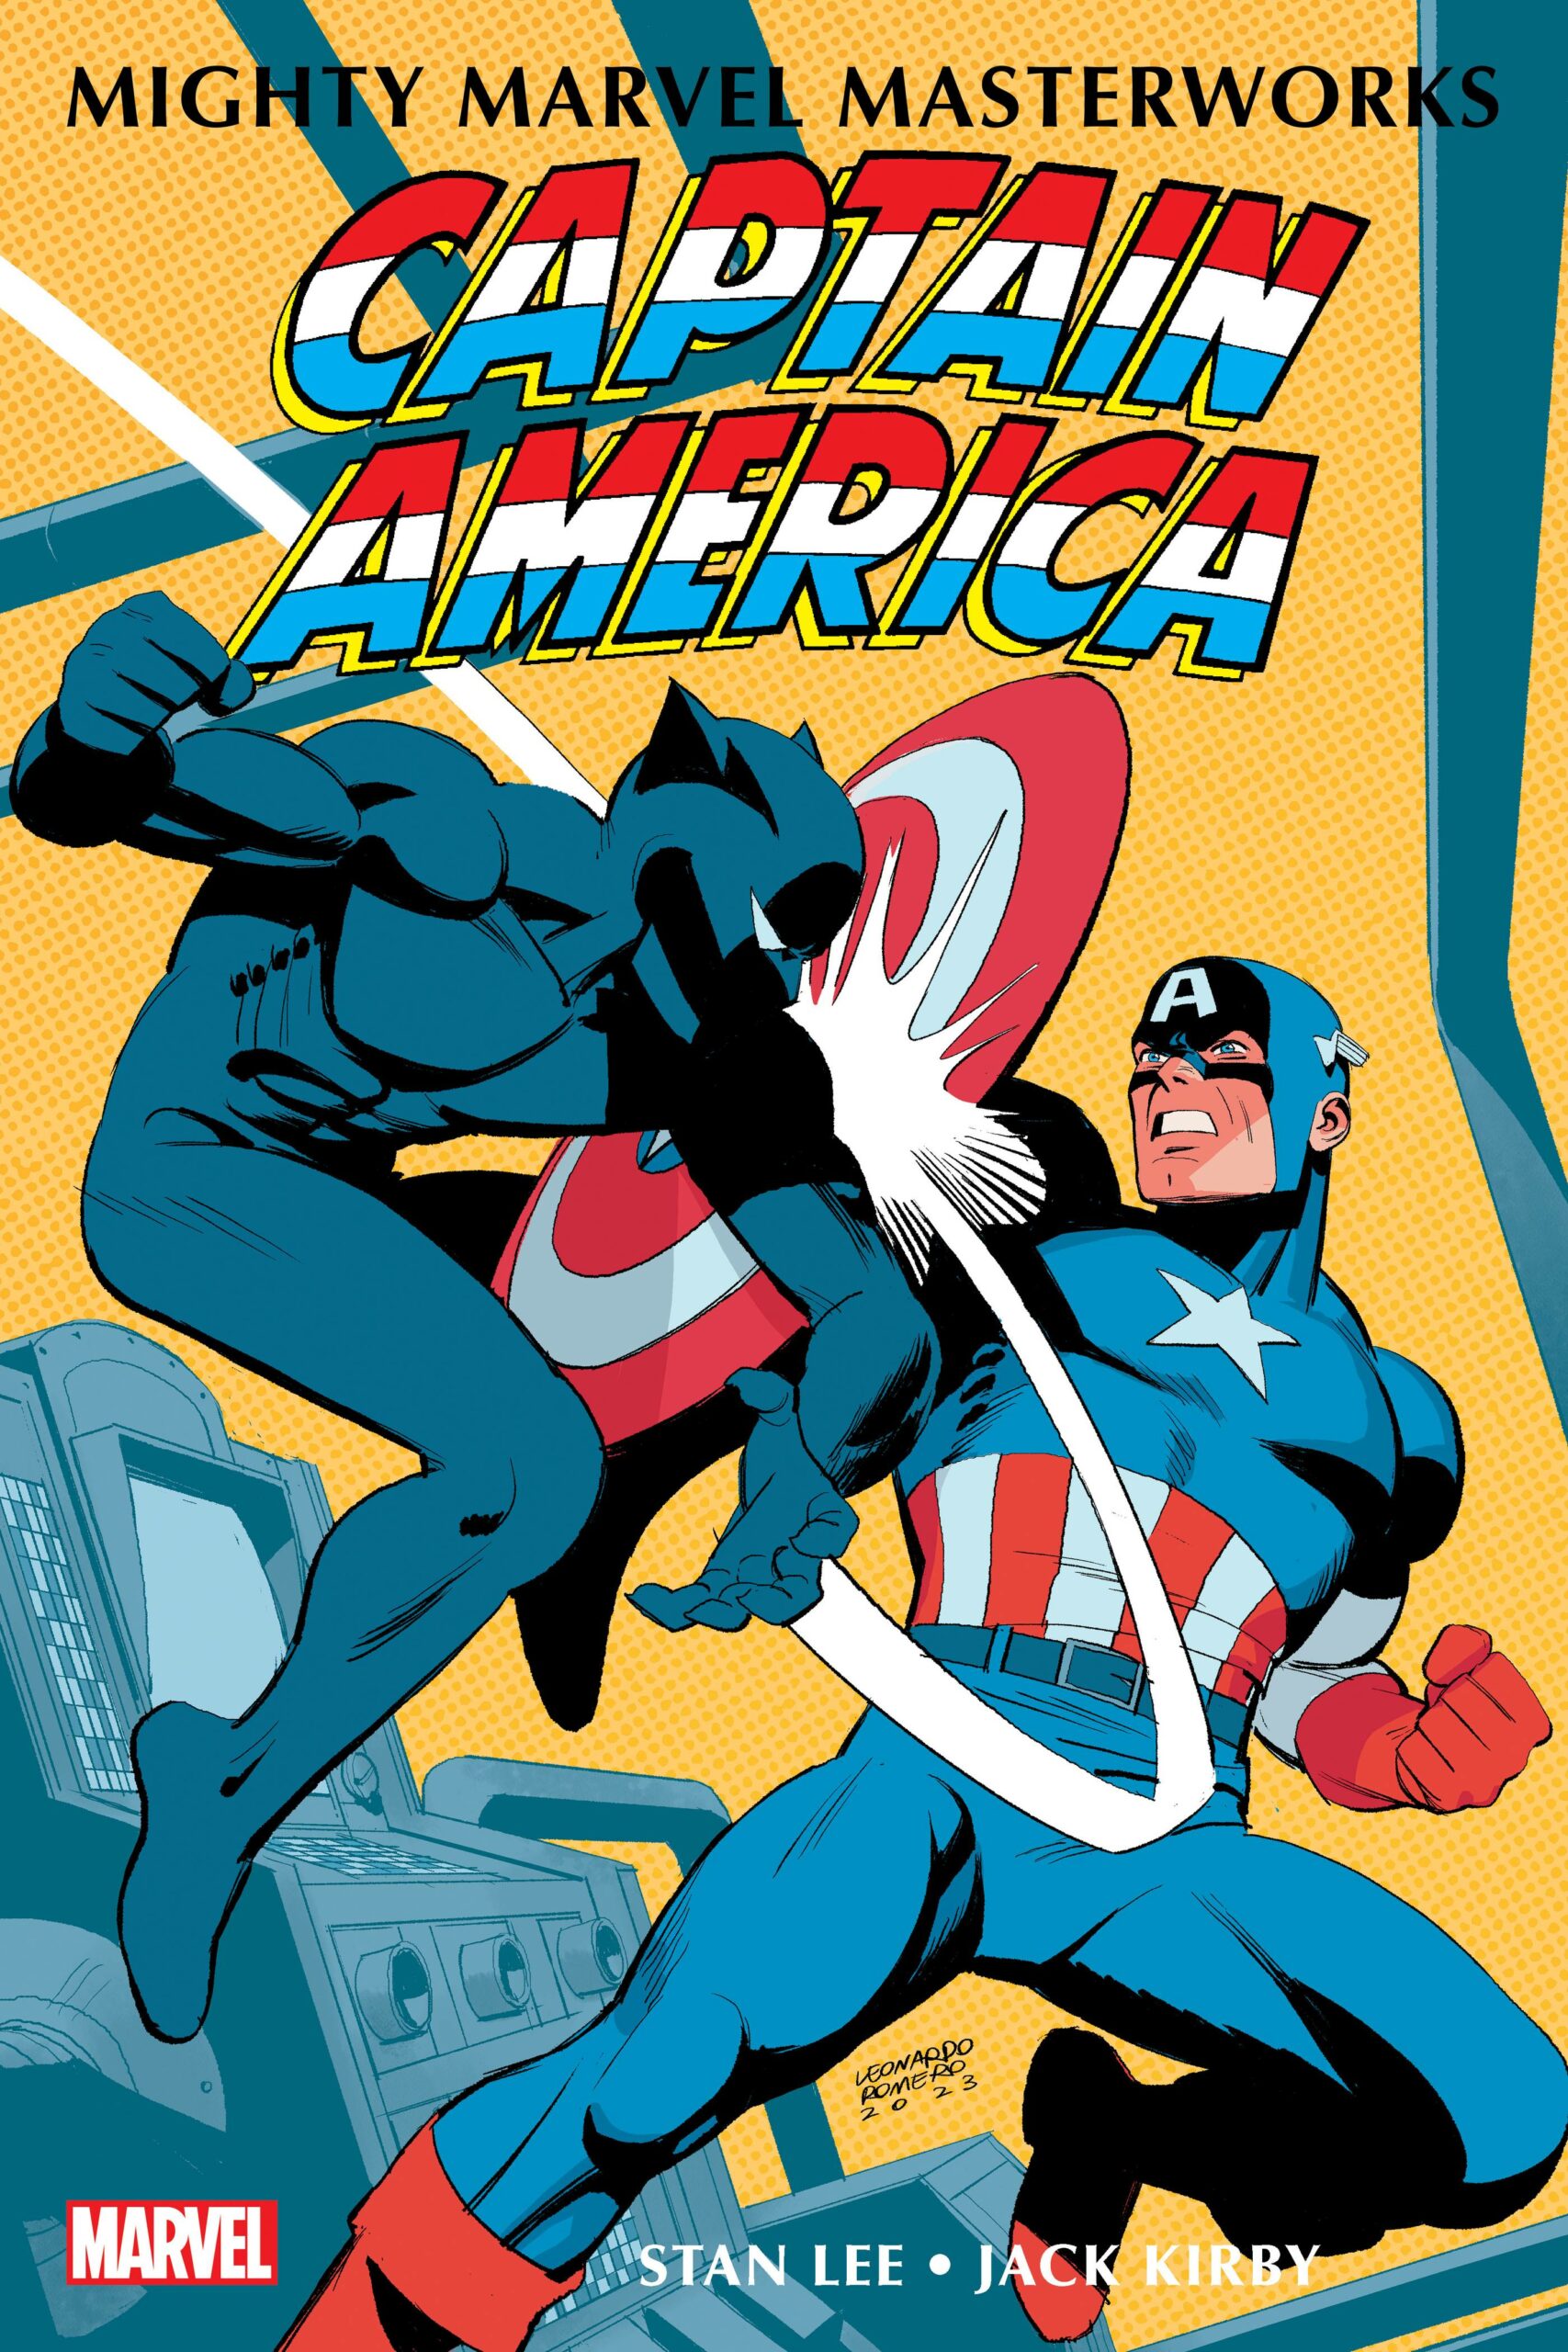 MIGHTY MMW CAPTAIN AMERICA TP VOL 03 TO BE REBORN